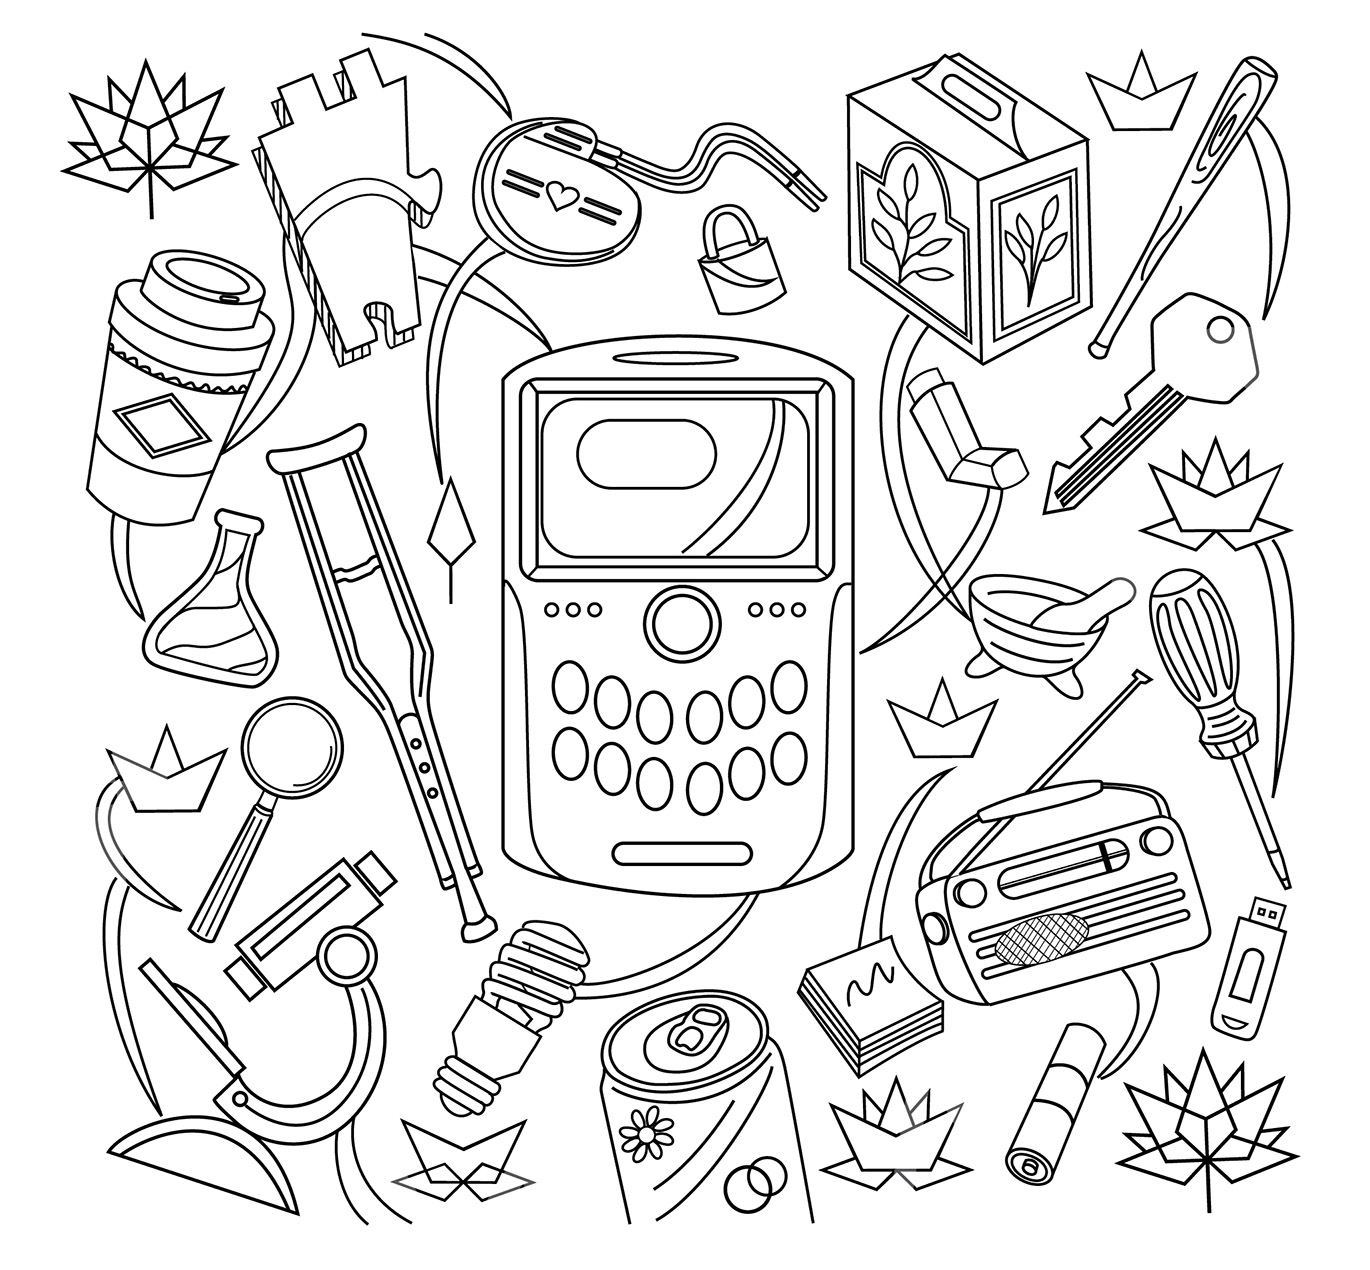 Colouring page featuring sample items that could be subject matter for patent registration and a description of patents.